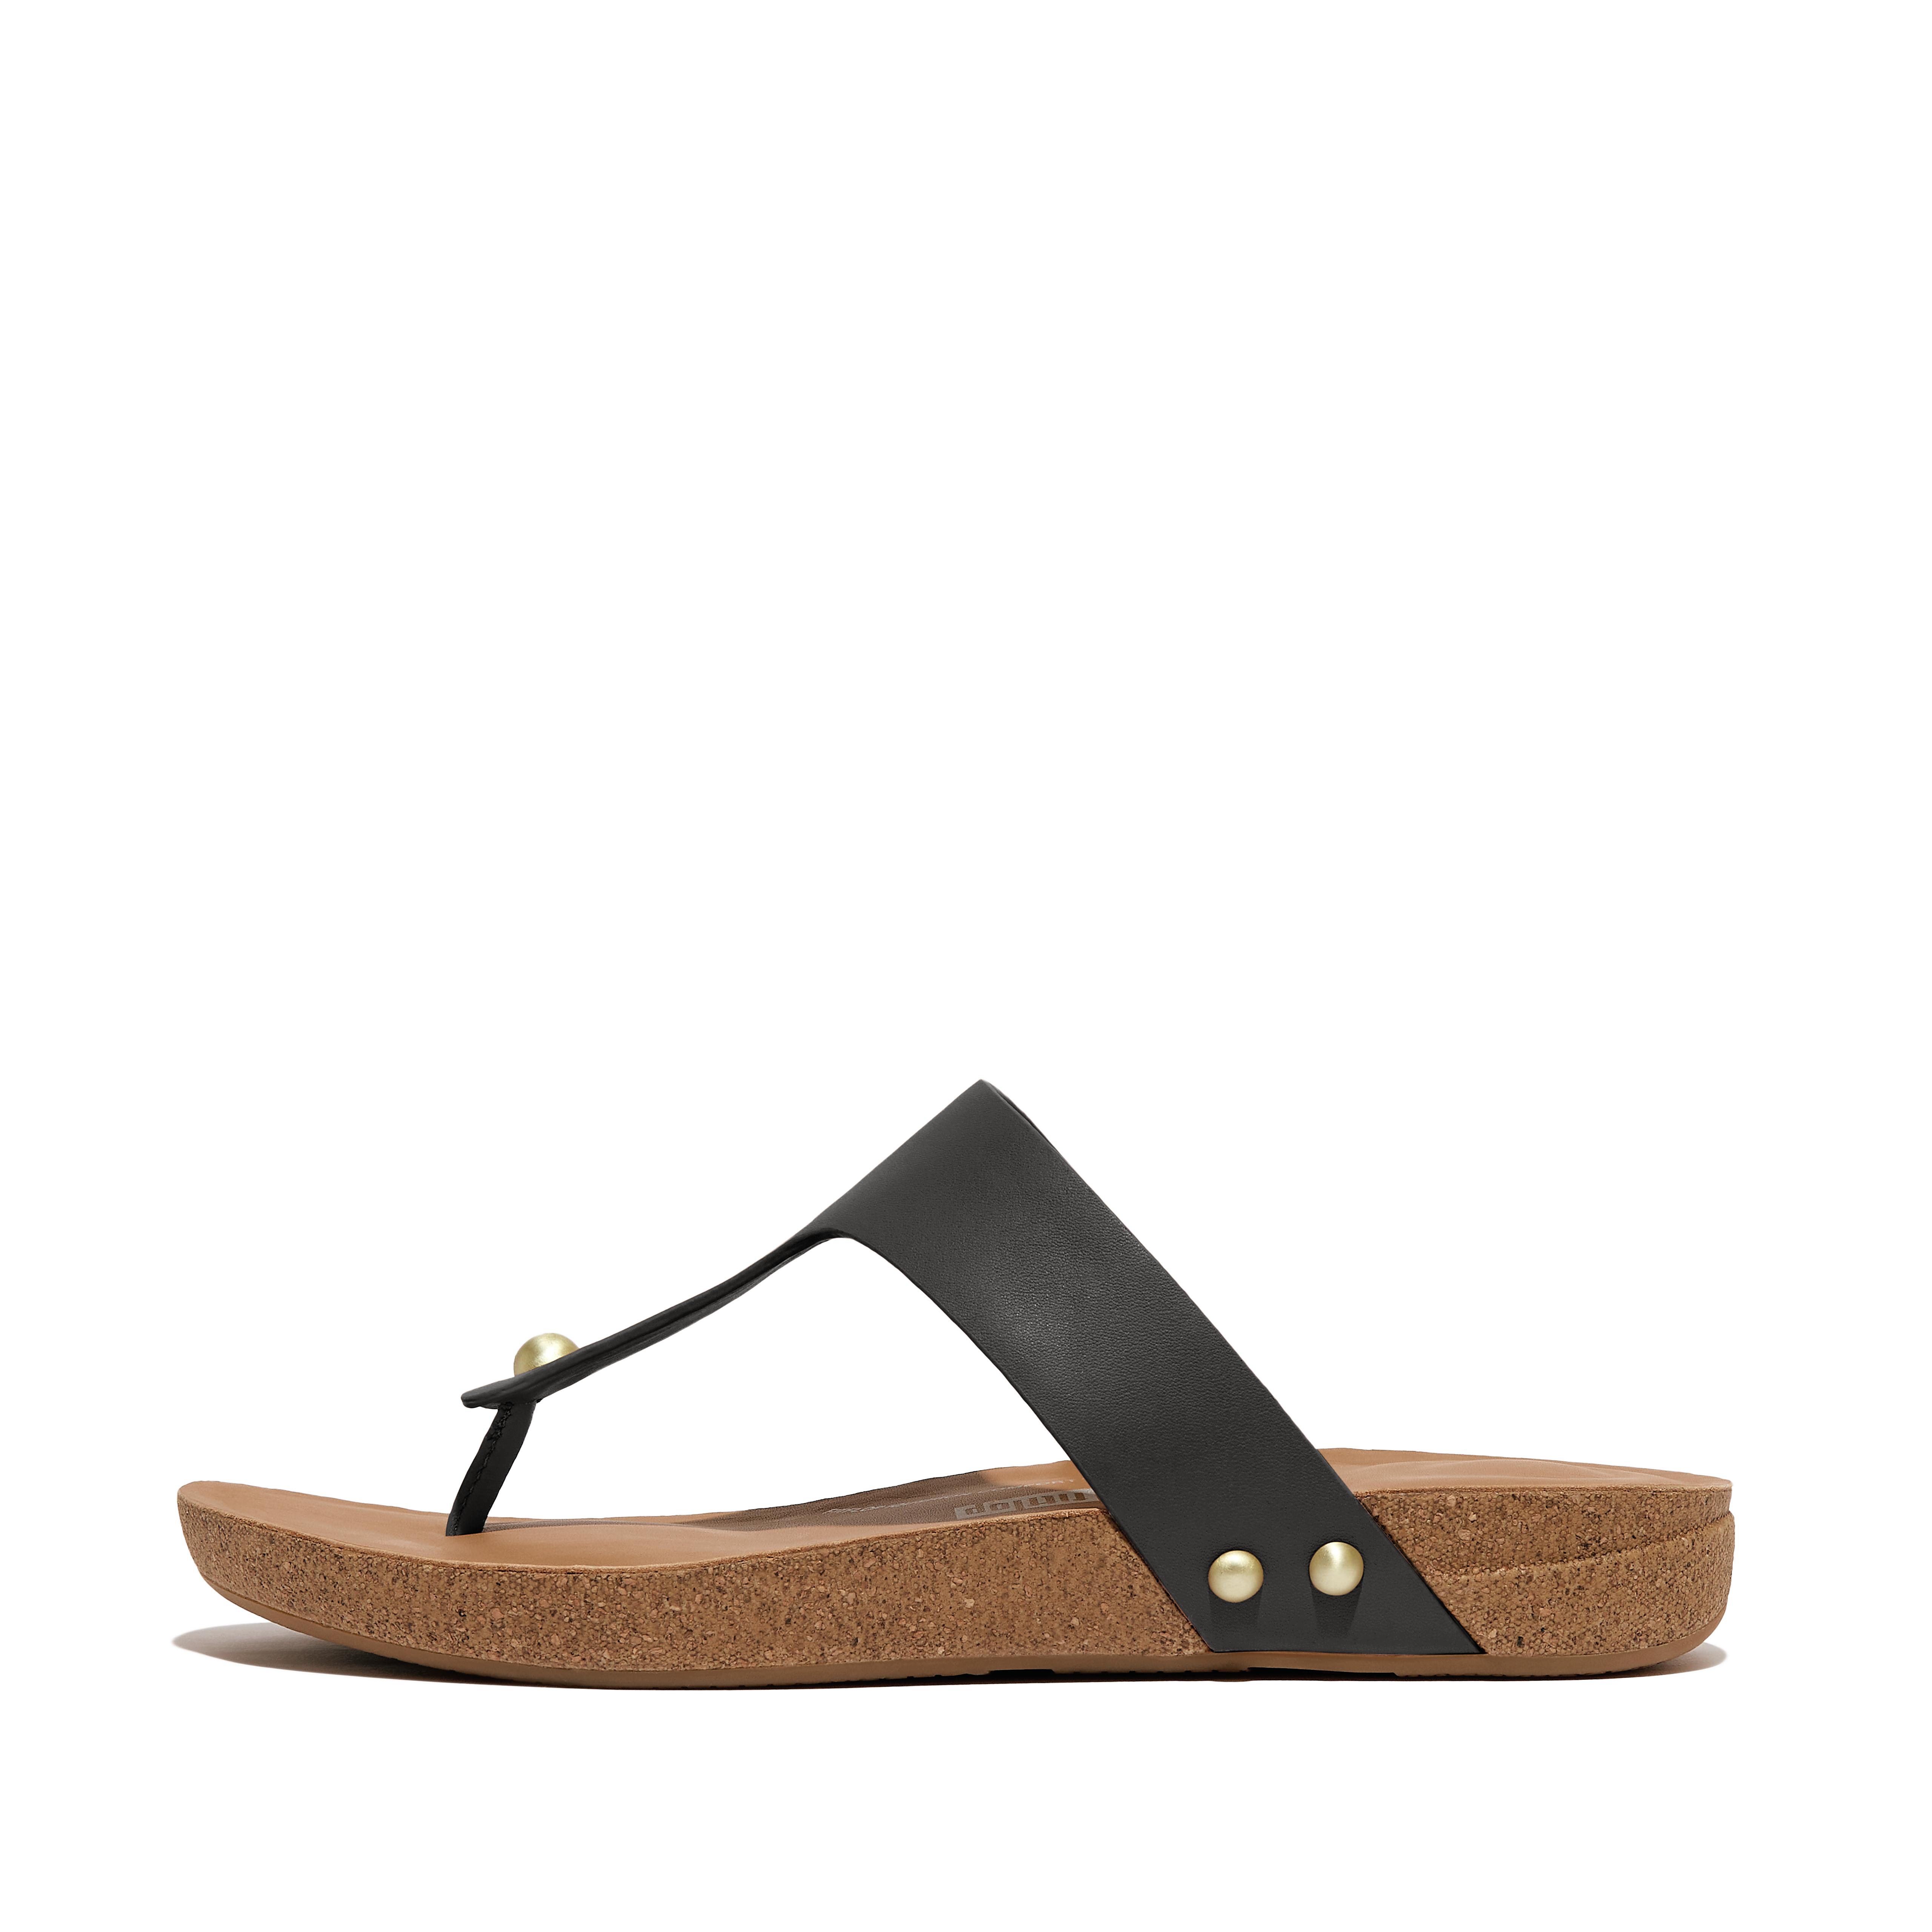 Fitflop Leather Toe-Post Sandals,Black